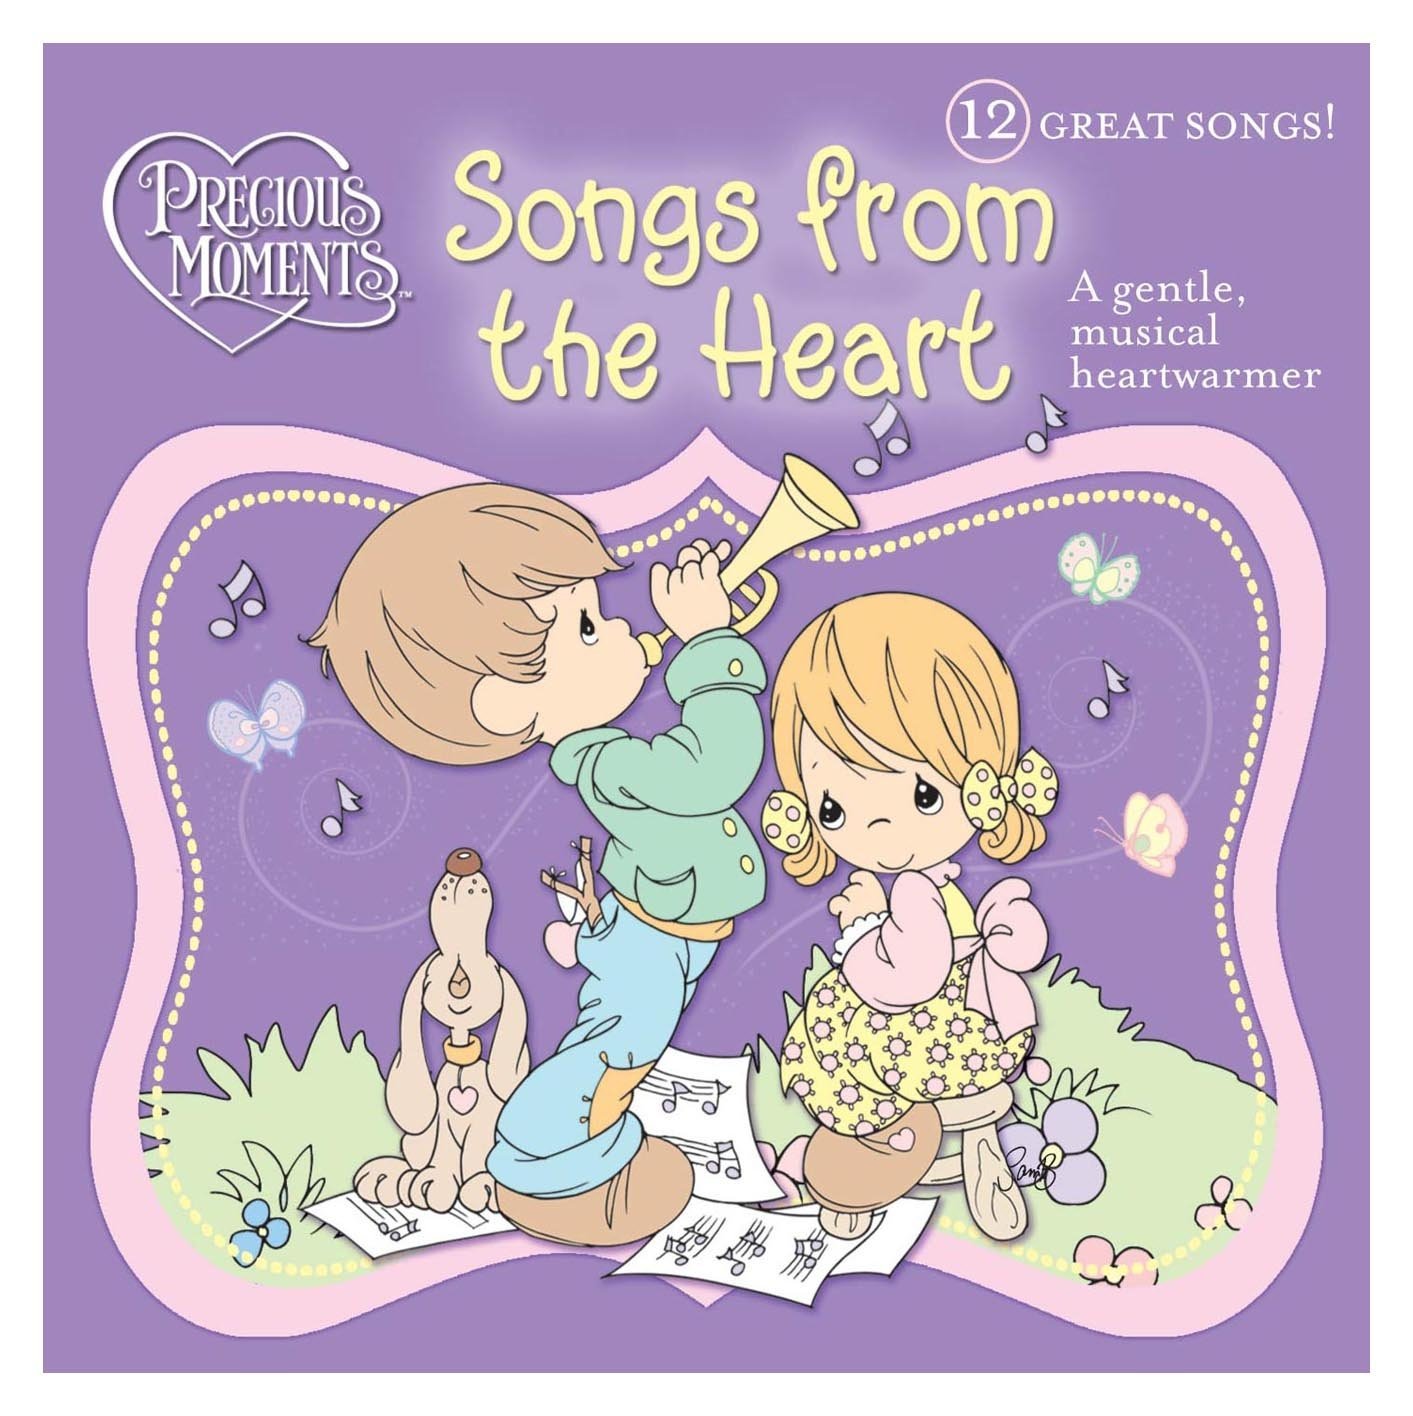 Songs From The Heart by Precious Moments